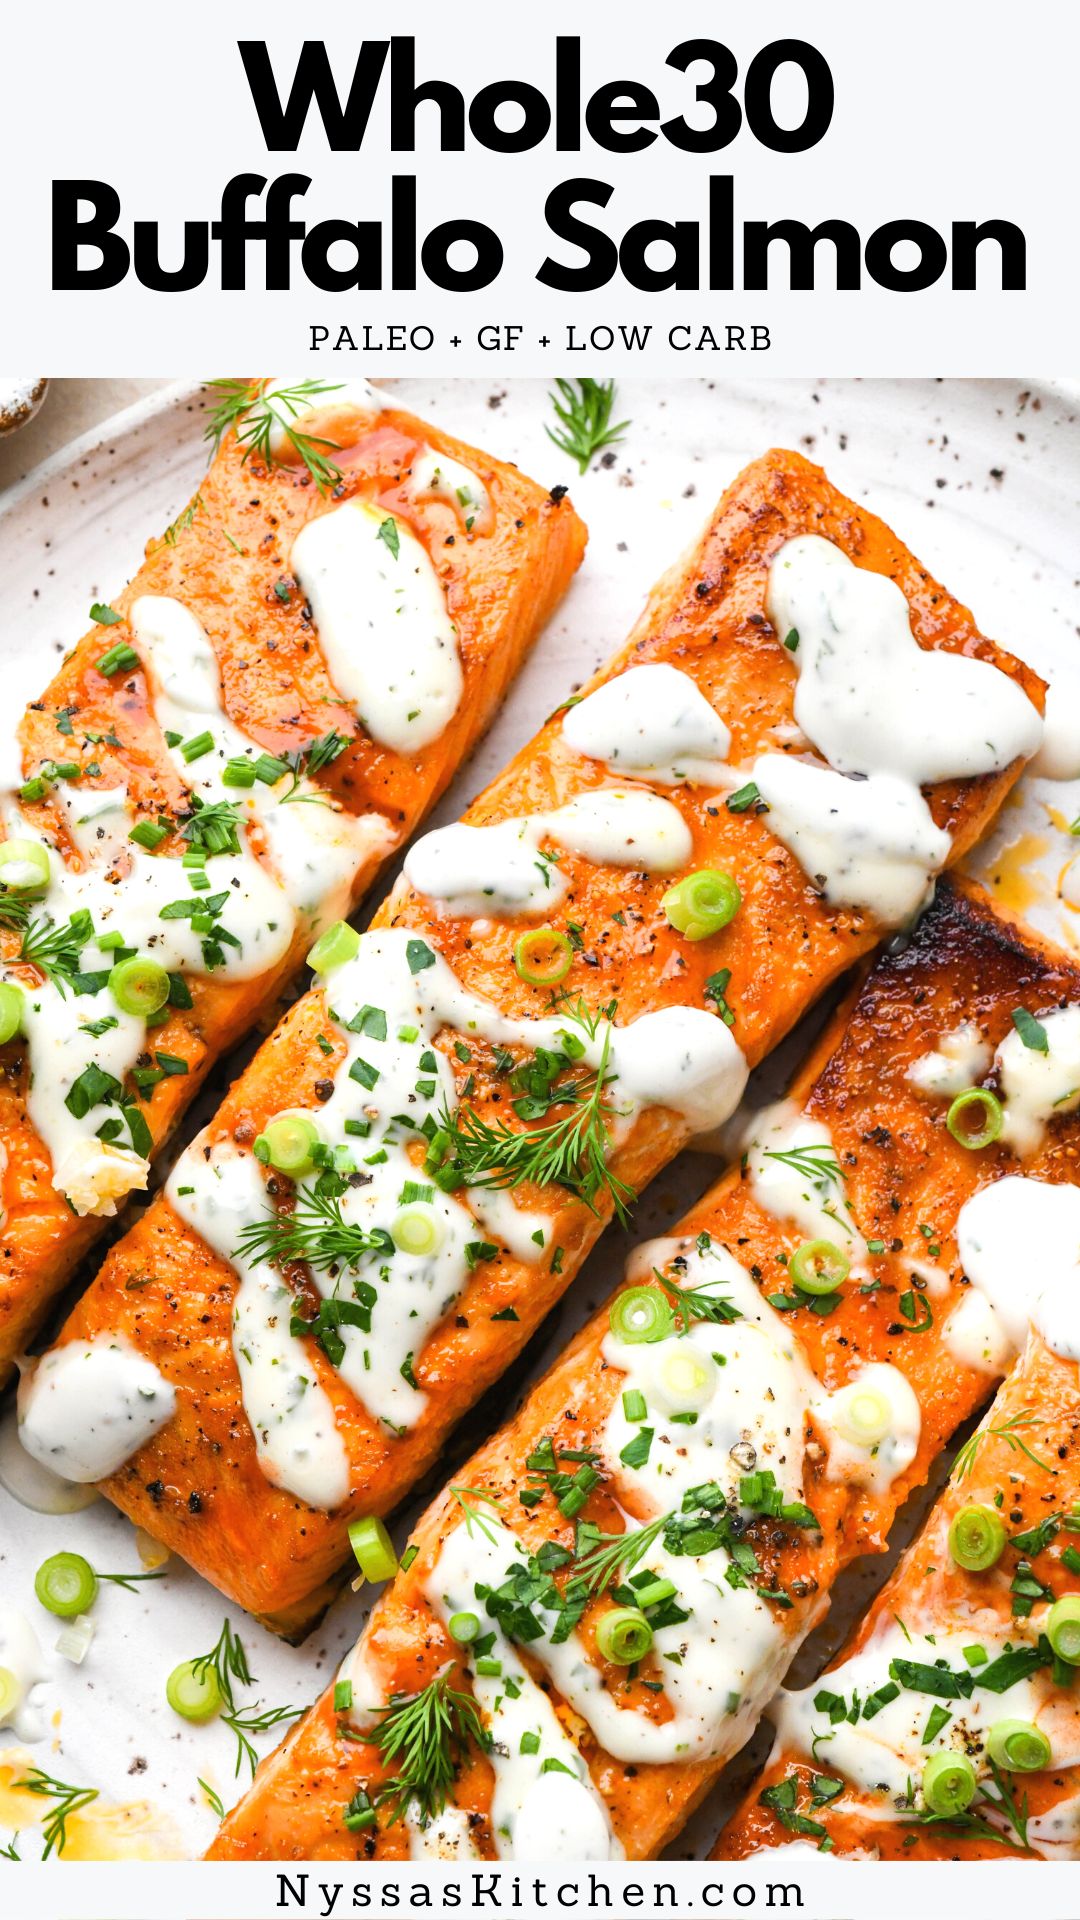 This baked buffalo salmon is a delightfully flavorful recipe that's easy enough to make any night of the week! It's marinated quickly in a simple make-at-home buffalo sauce and baked in the oven until perfectly cooked - flaky and moist! Paleo, Whole30, GF, keto friendly, low carb, and dairy free option.